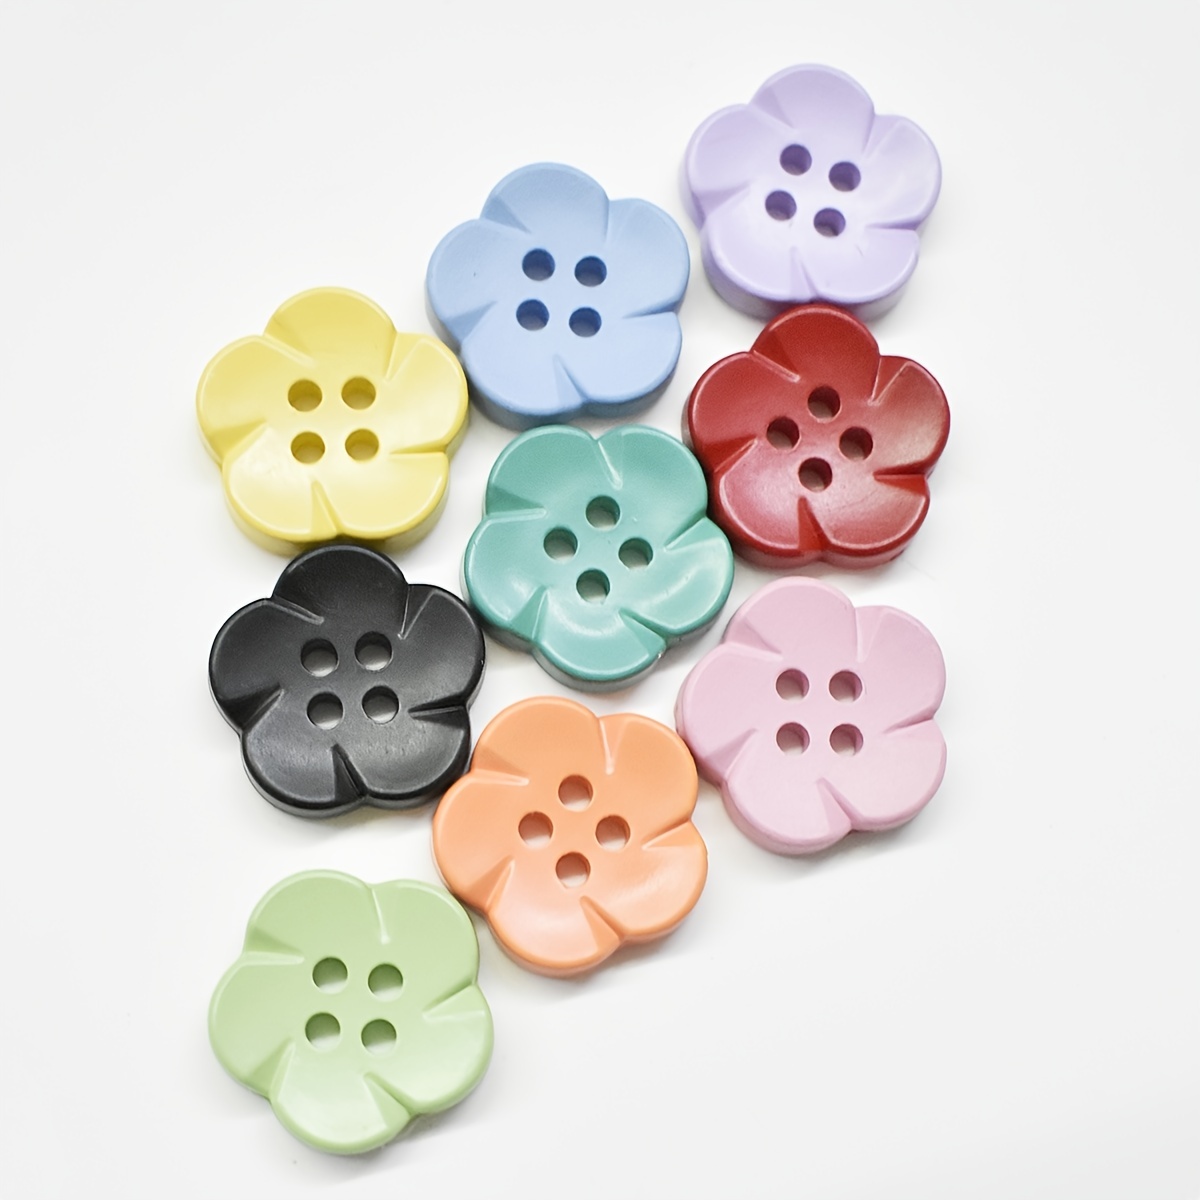 Spptty Cute Buttons,Small Buttons,200pcs Flower Buttons Colorful DIY Making  Plastic Glossy Decorative 1.3x1.3cm/0.5x0.5in Sewing Buttons For  Scrapbooking 